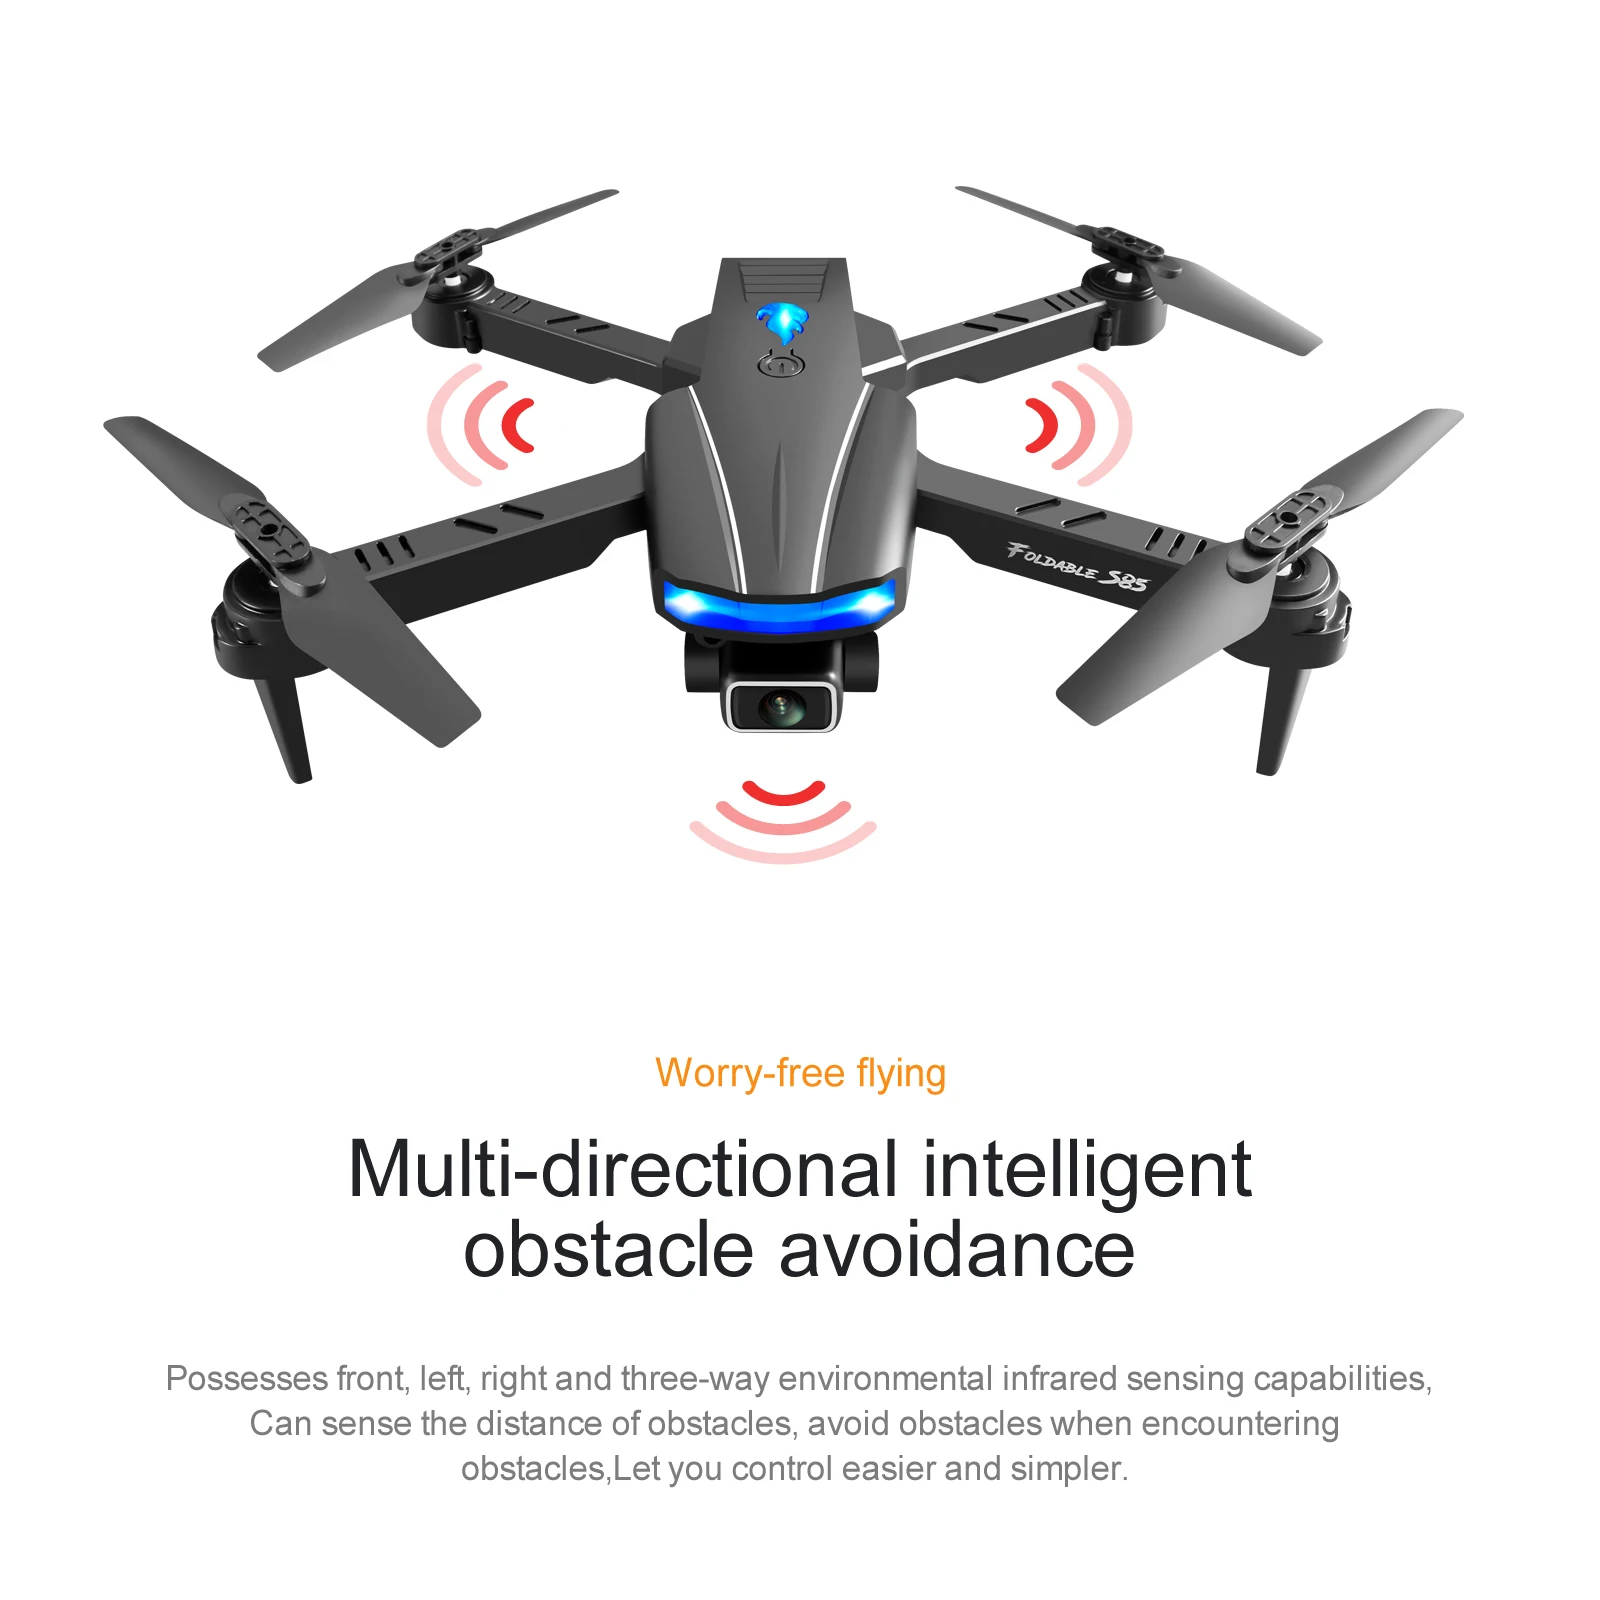 

Burst new automatic obstacle avoidance S85 drone 4CH RC 4K camera RTF flying toy camera UAV 50x zoom high-speed drone, Black